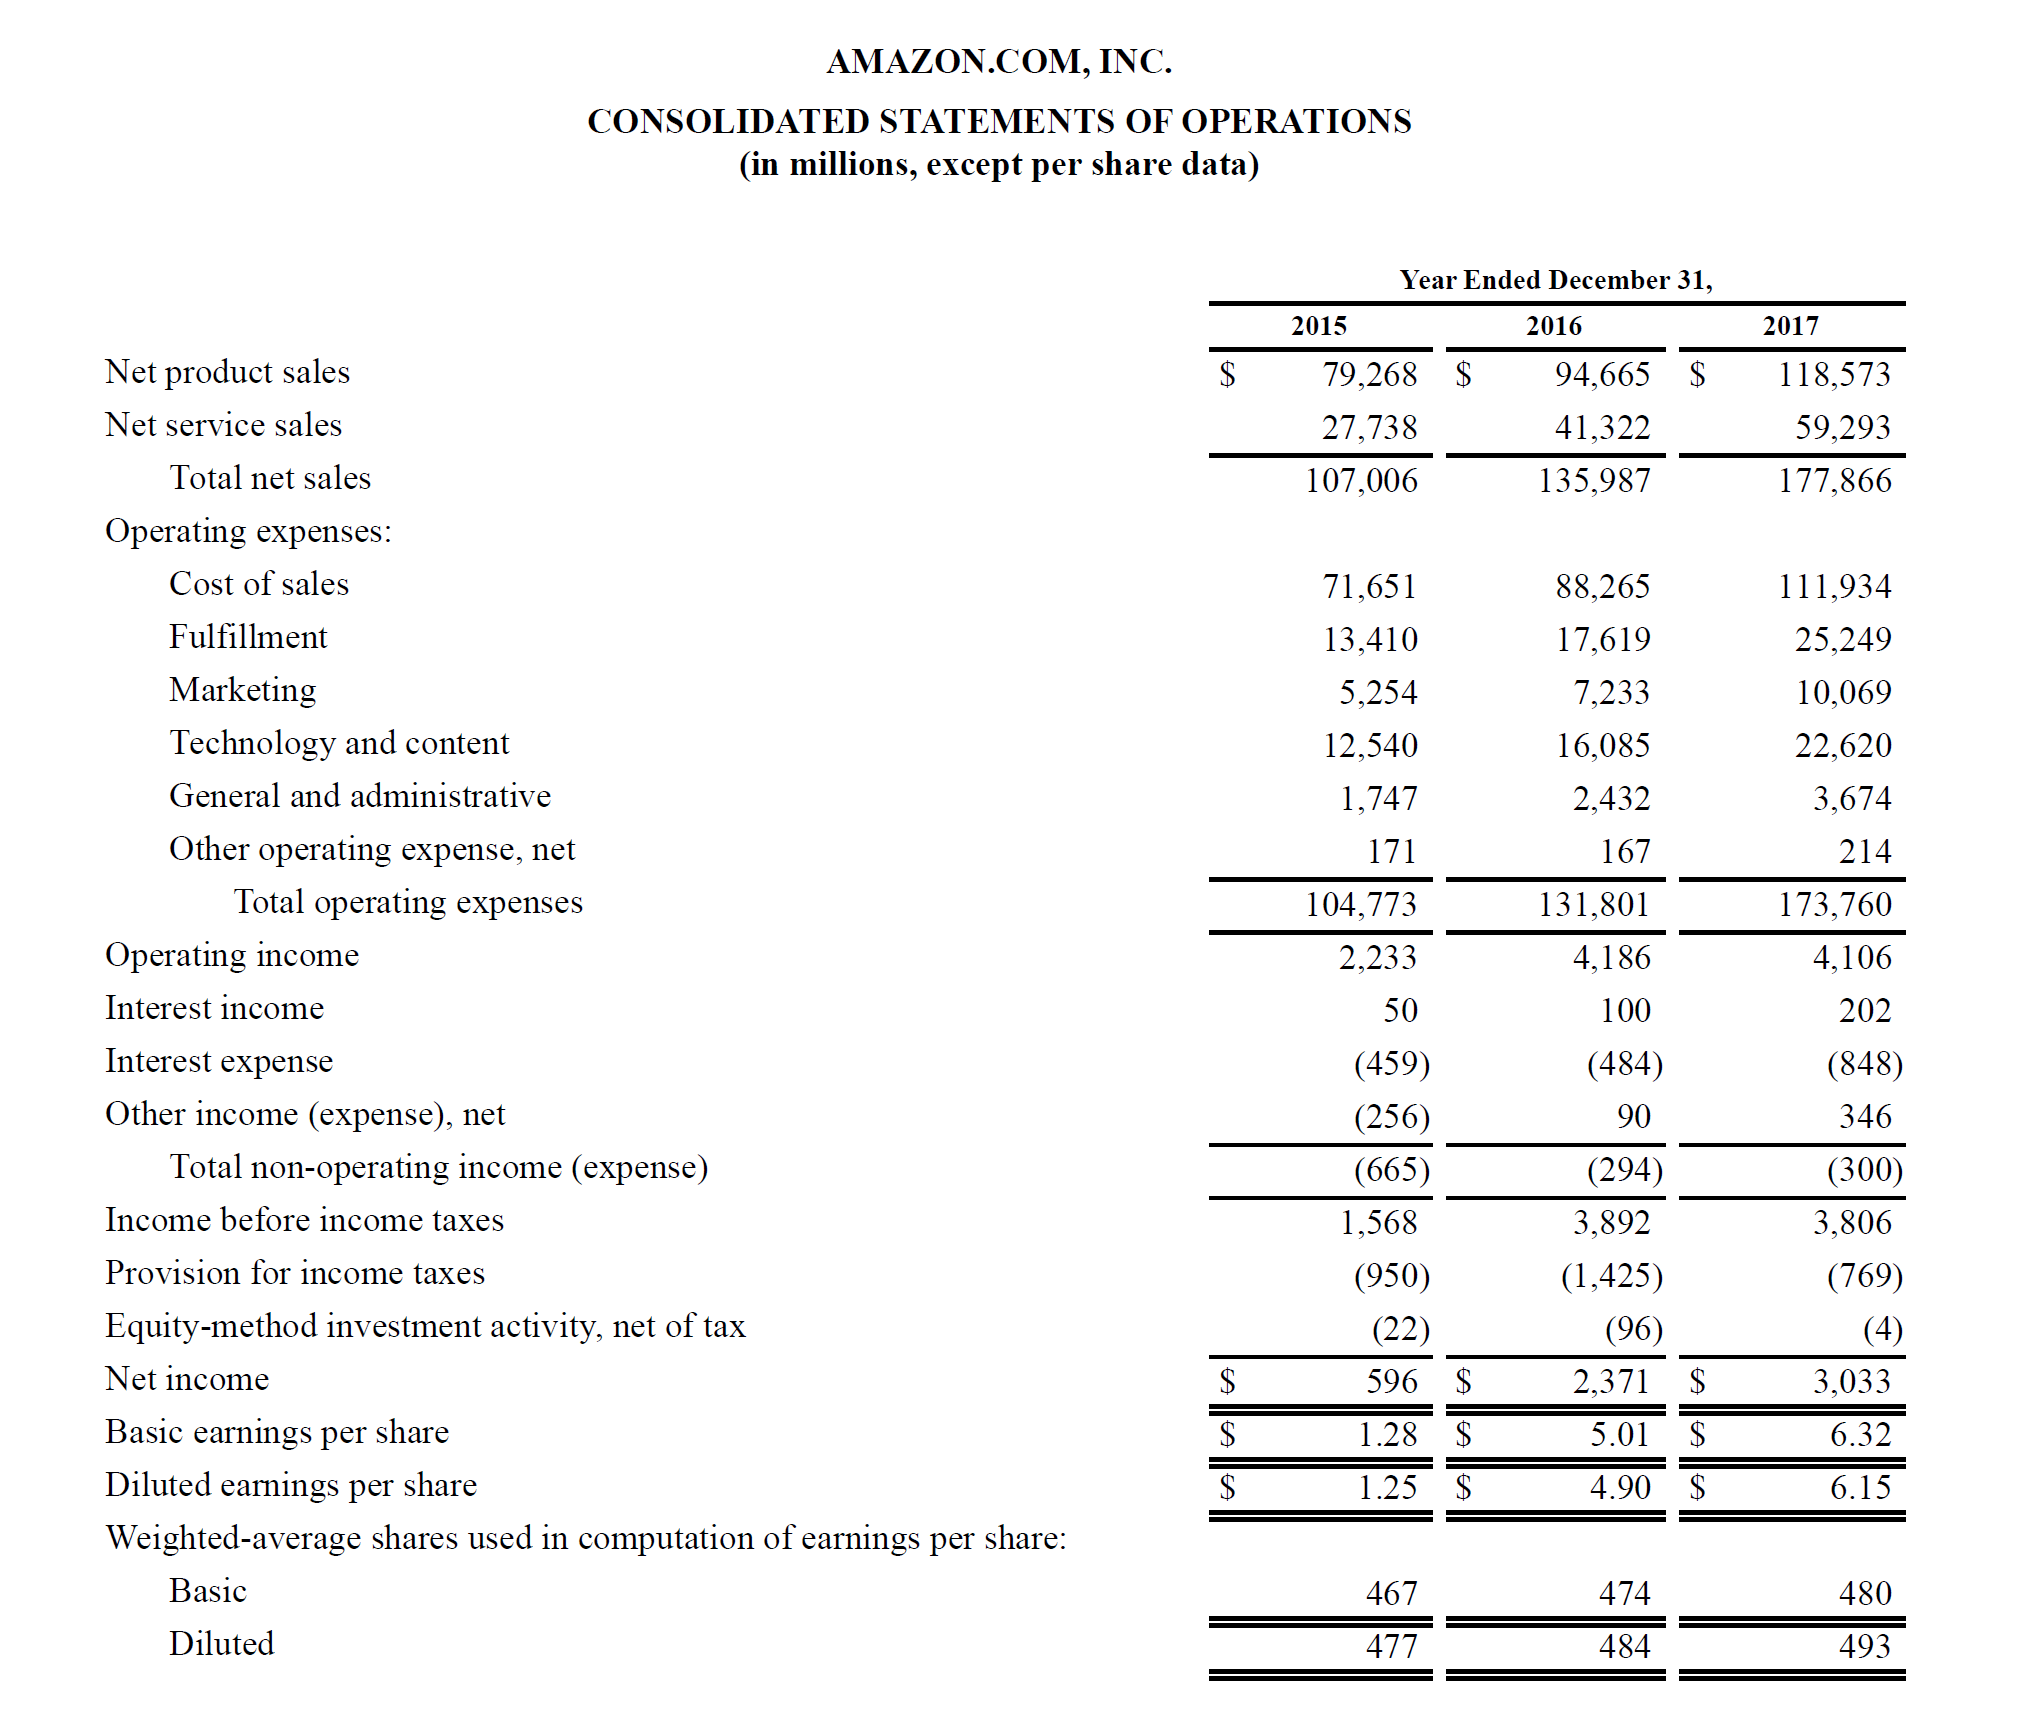 Example Profit and Loss Statement (P&L) from Amazon